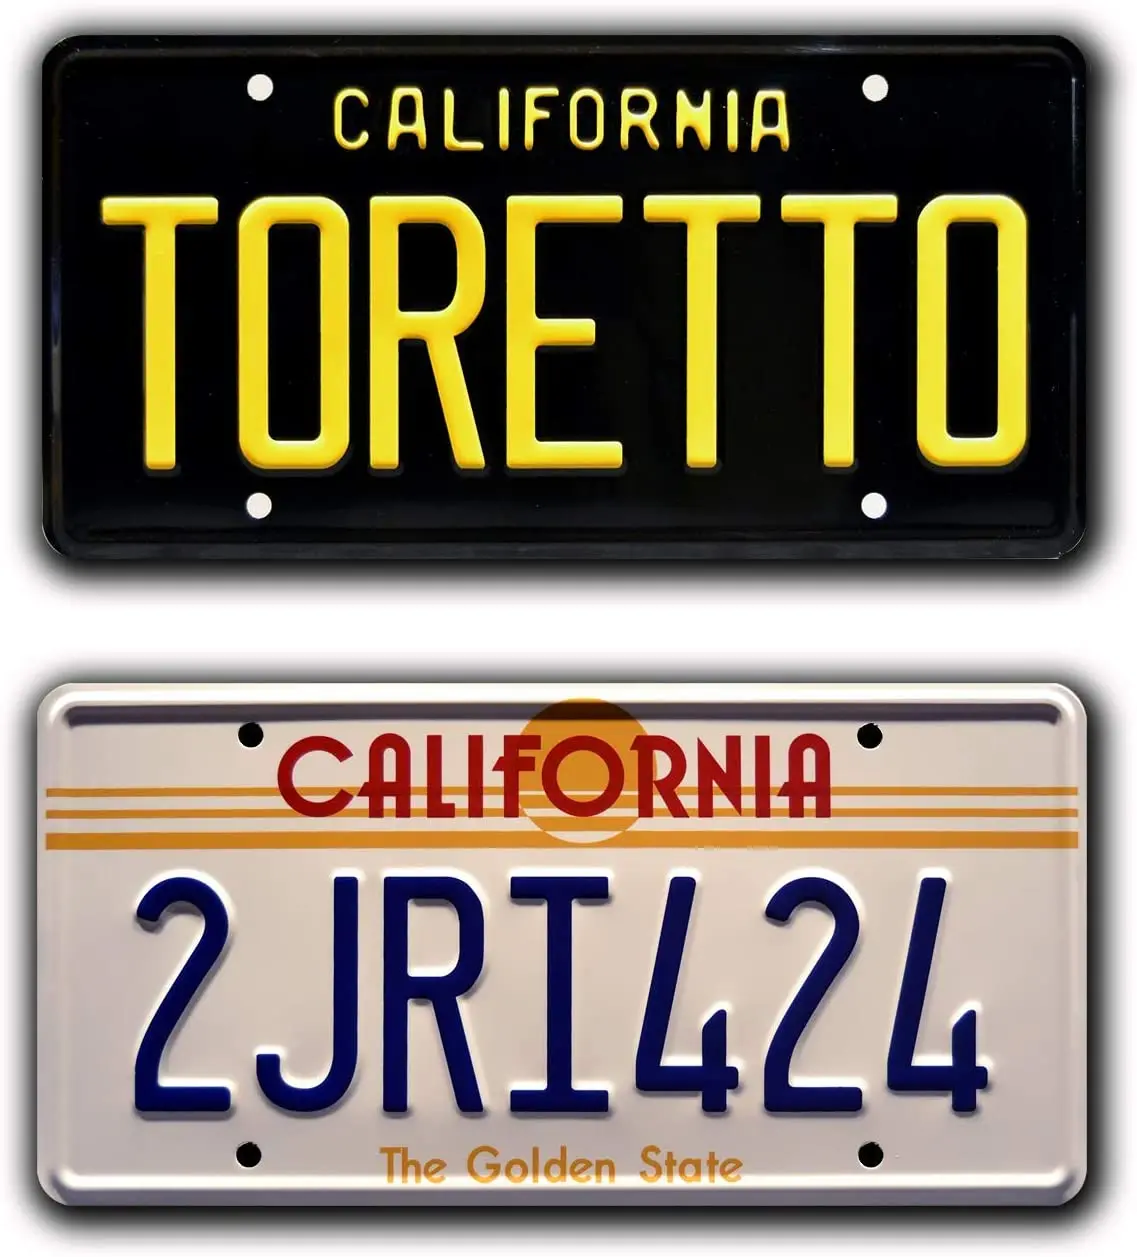 

Celebrity Machines Fast and Furious | Toretto + 2JRI424 | Metal Stamped License Plates